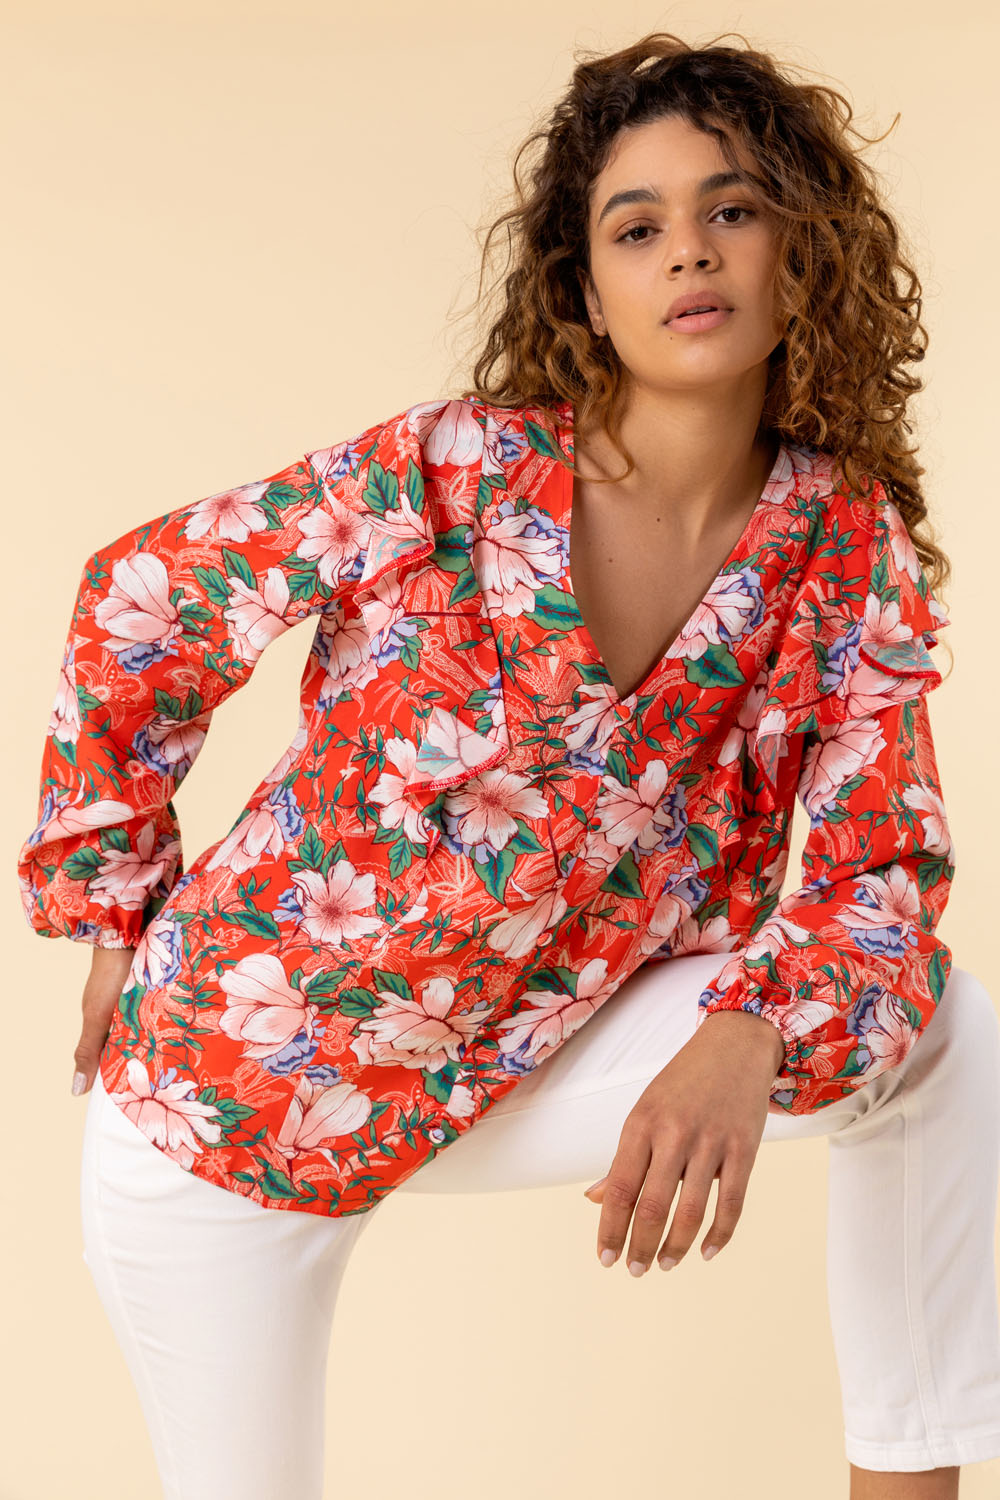 CORAL Floral Paisley Print Frill Sleeve Top, Image 5 of 5